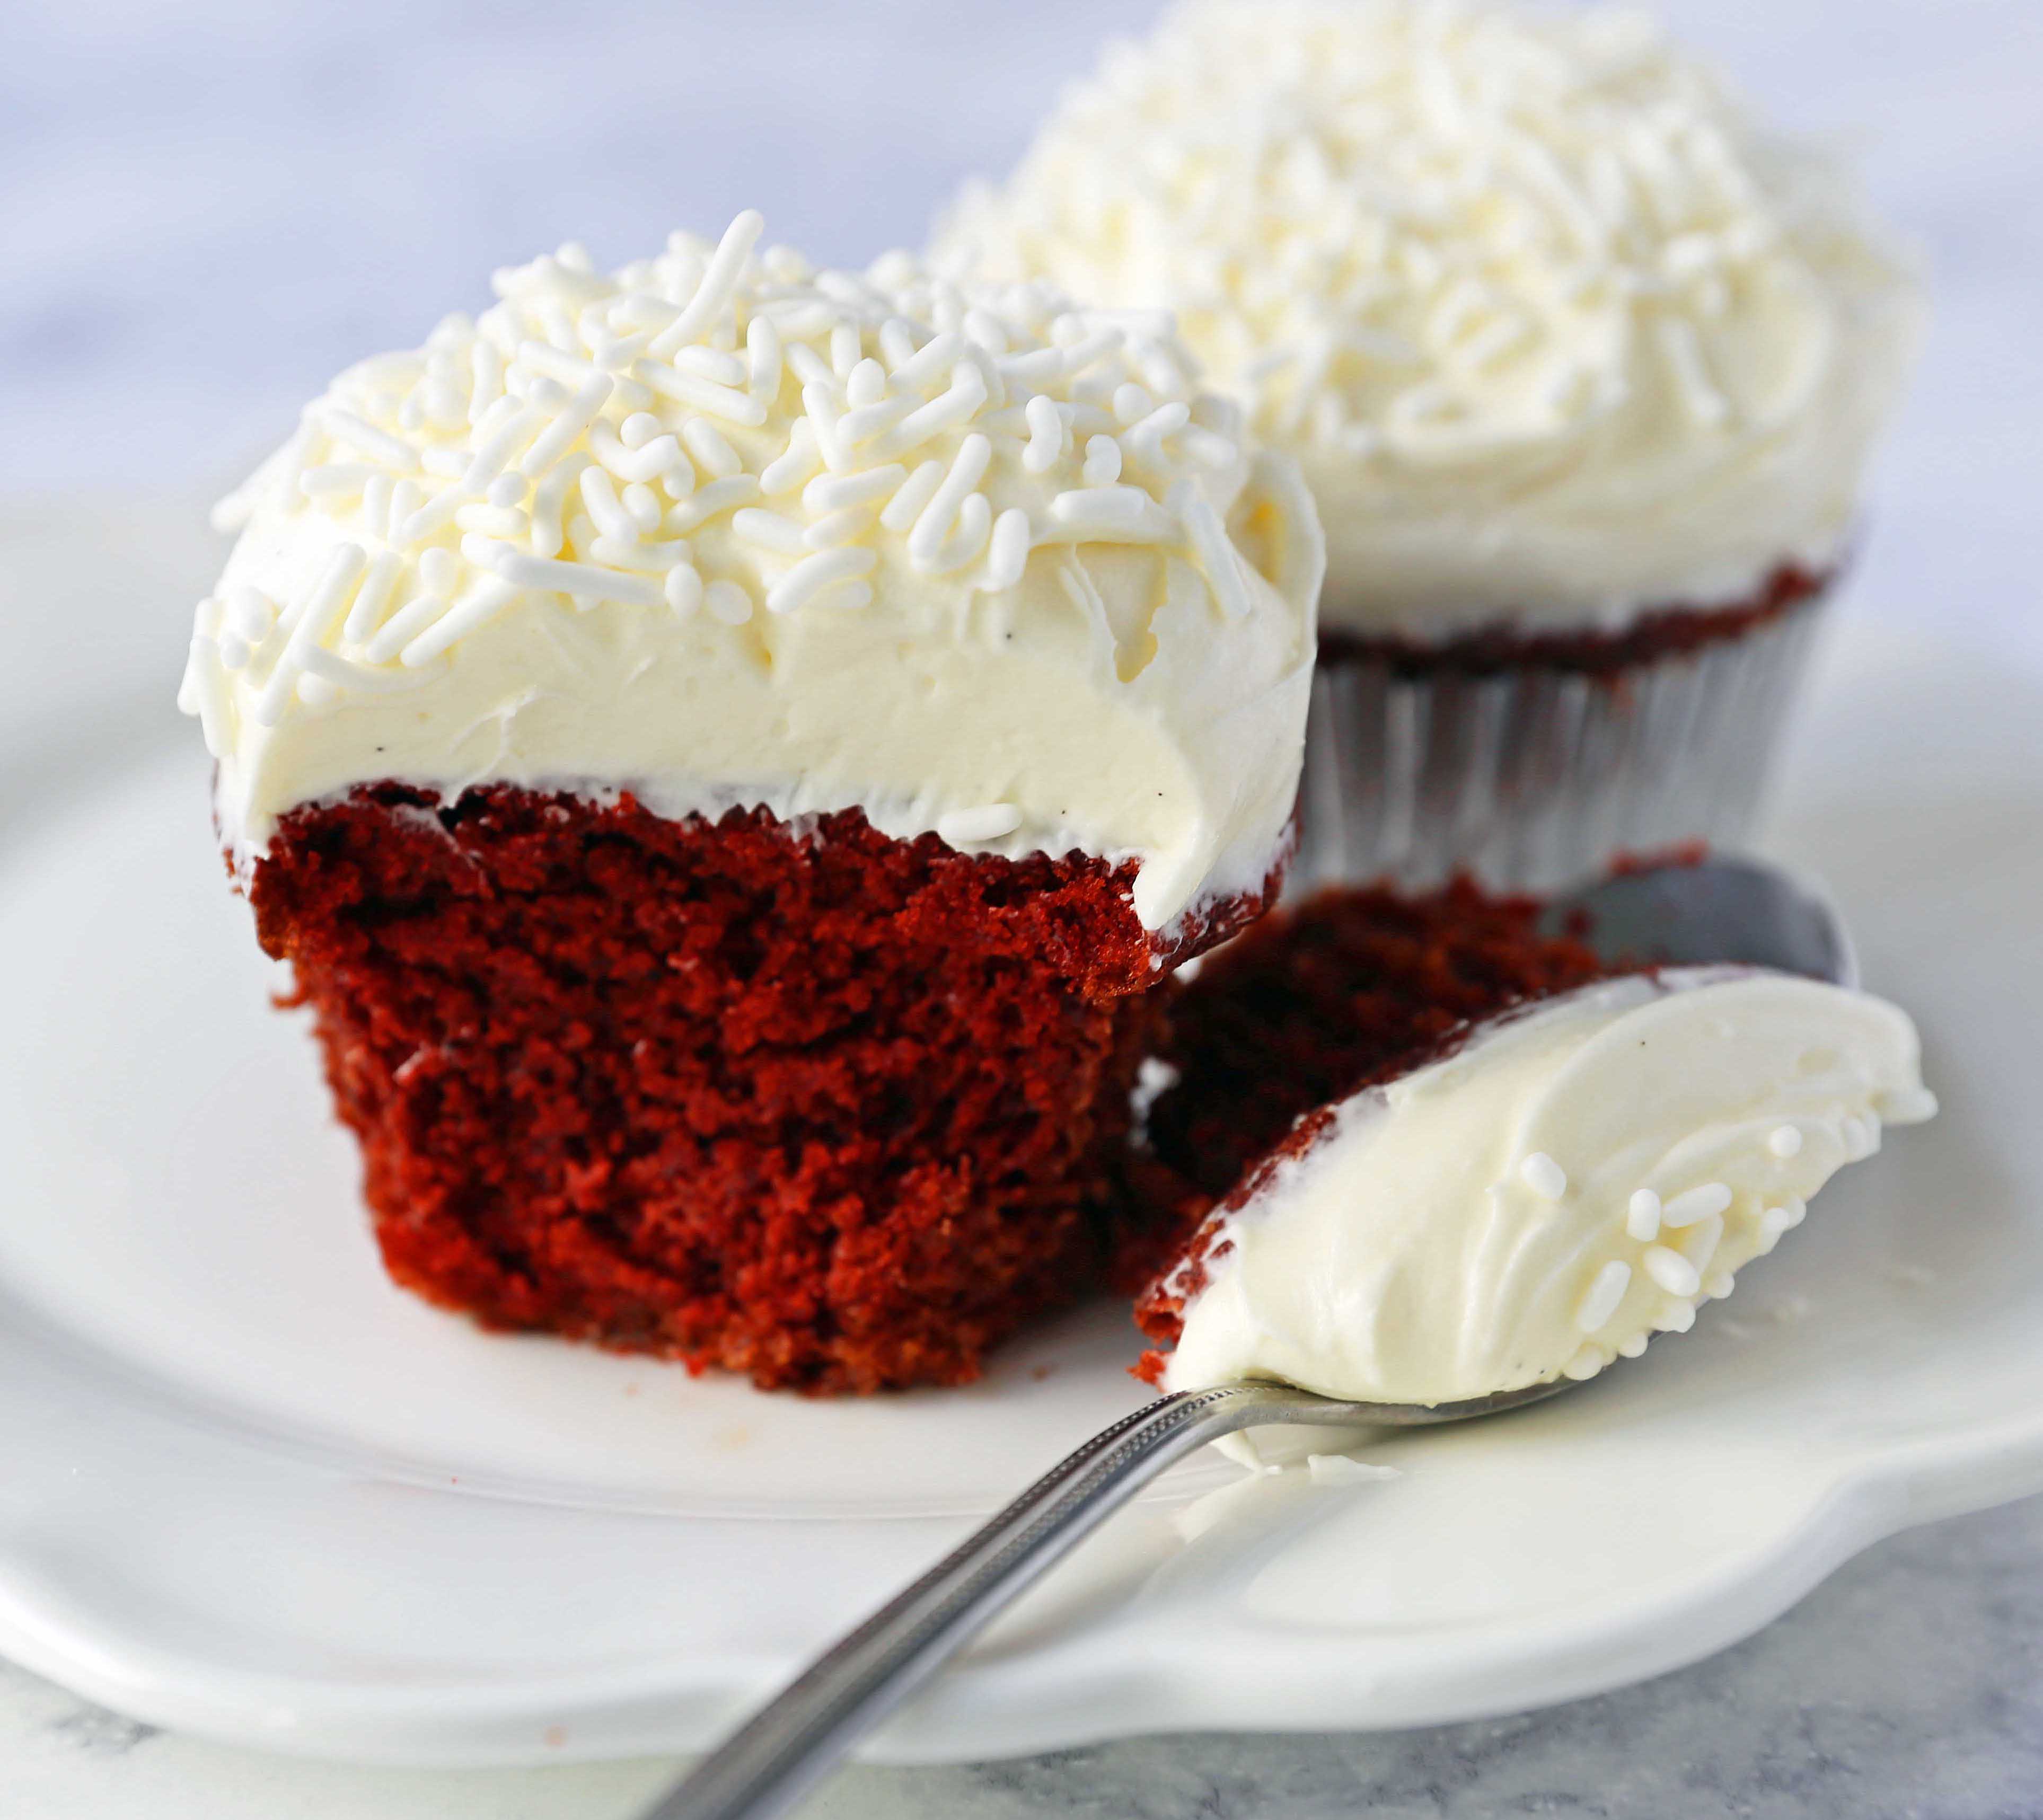 Red Velvet Cupcakes. The Best Red Velvet Cupcake Recipe with Cream Cheese Frosting. All of the tips and tricks for making perfect red velvet cupcakes every single time! www.modernhoney.com #redvelvet #redvelvetcupcakes #redvelvetcupcake